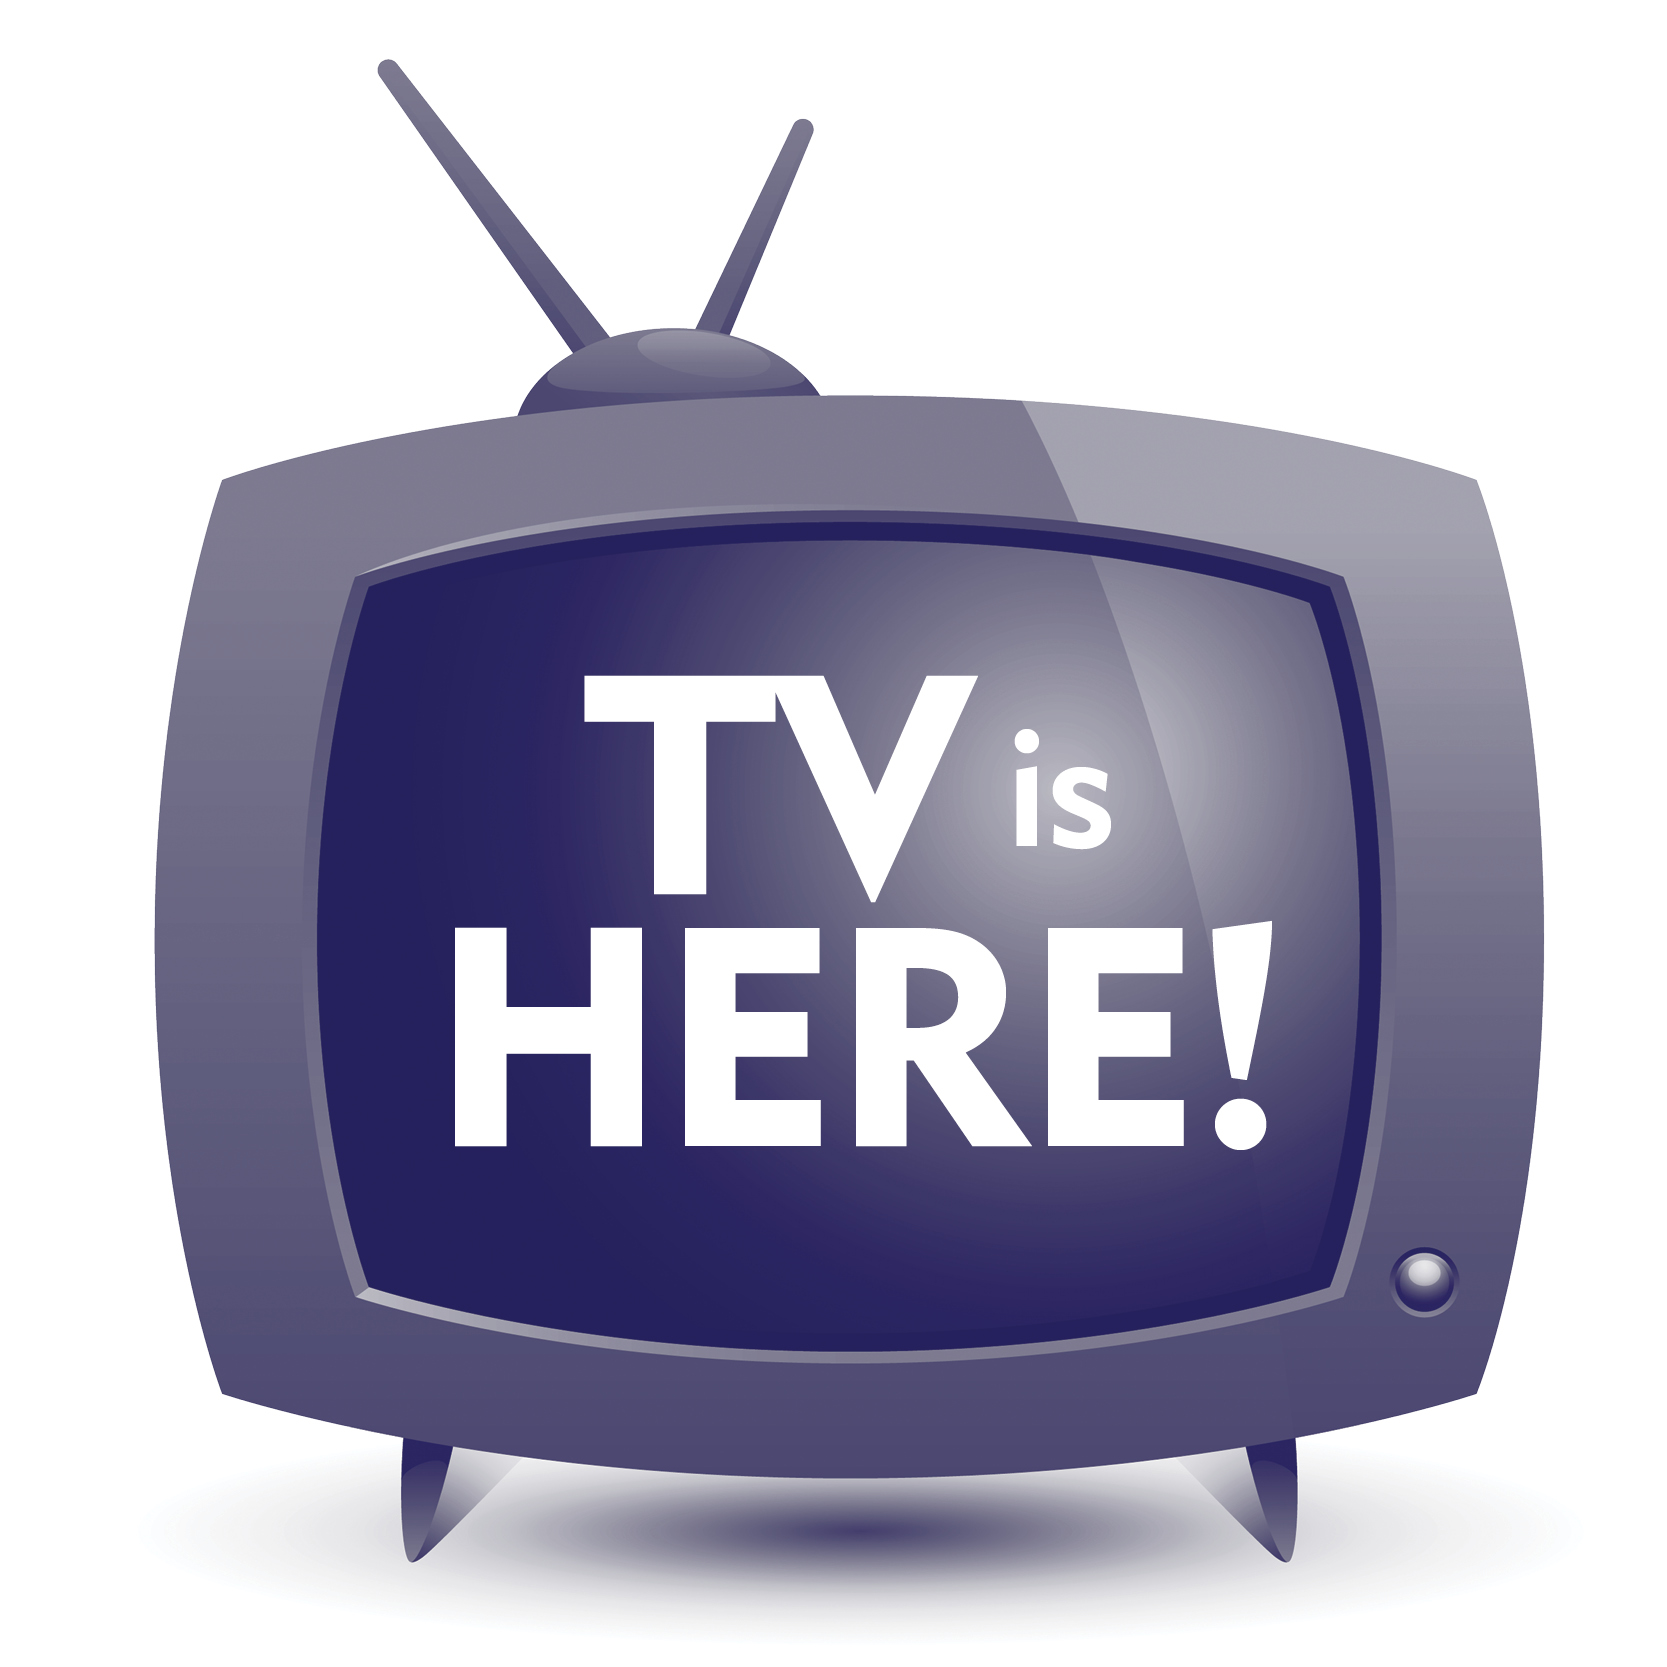 illustration of a television that says 'TV is here!'